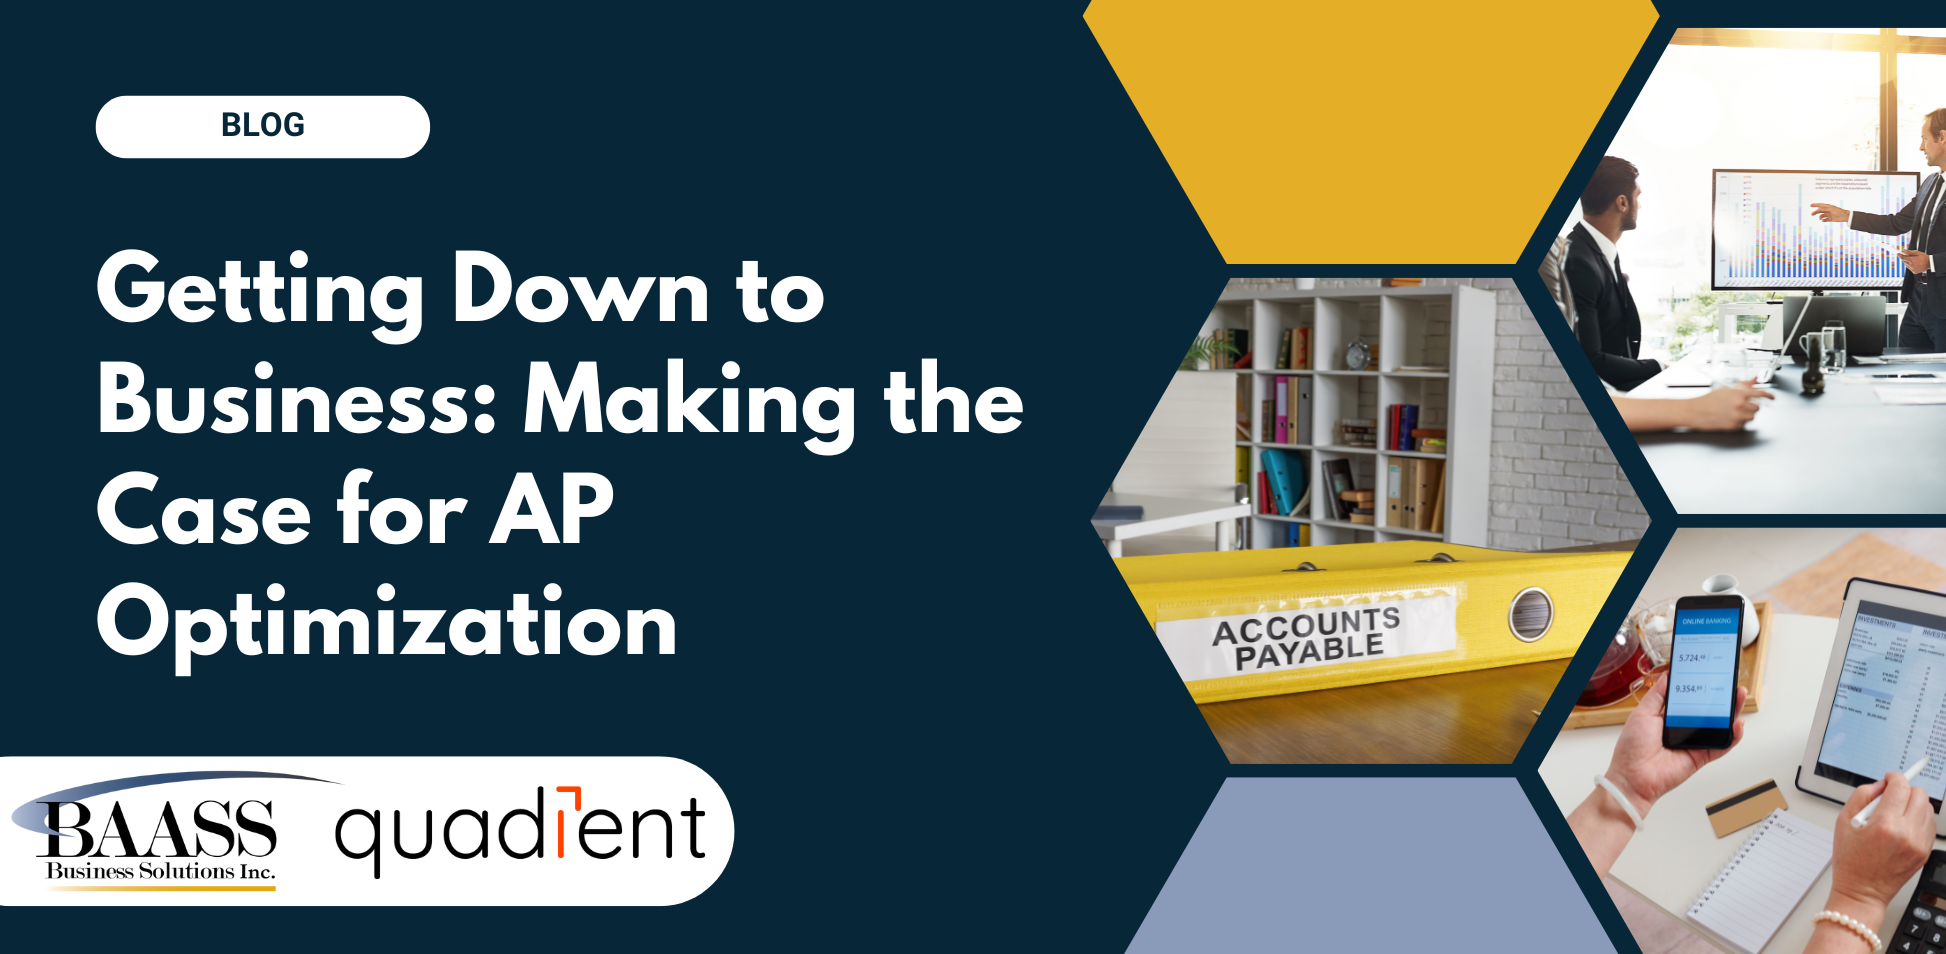 Getting Down to Business: Making the Case for AP Optimization